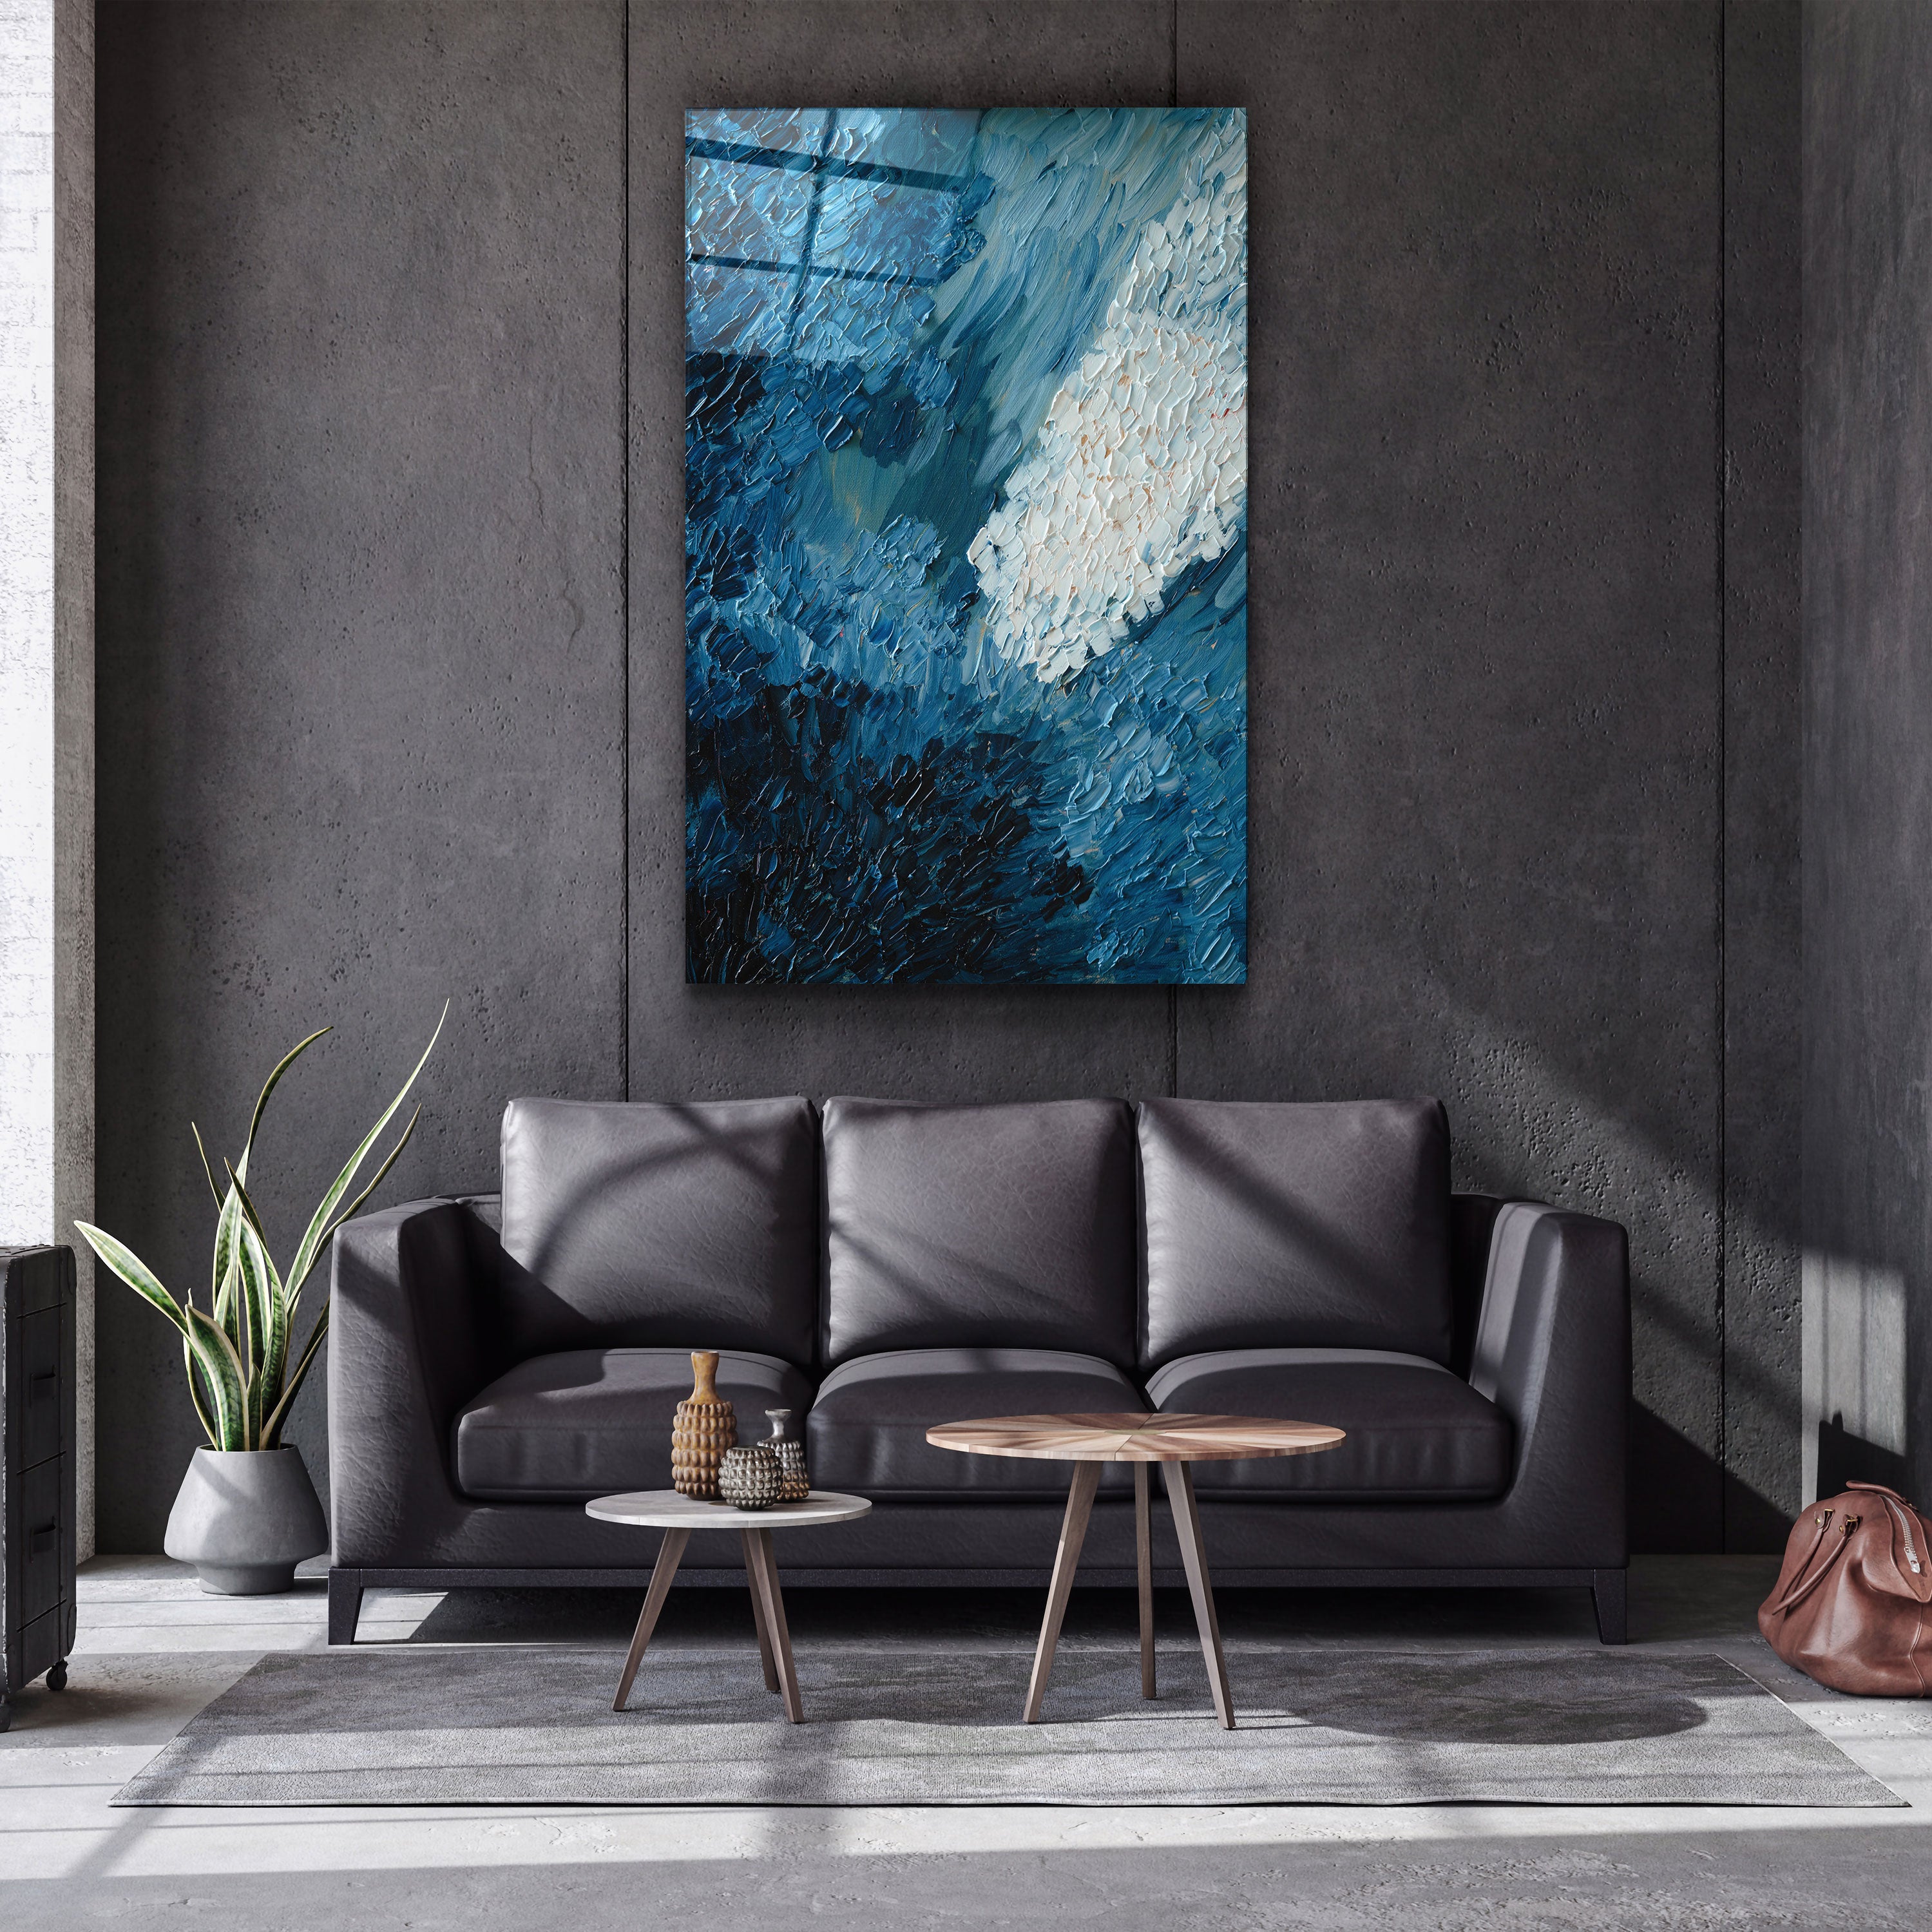 ・"Blue Oil Painting - Abstract"・Designer's Collection Glass Wall Art